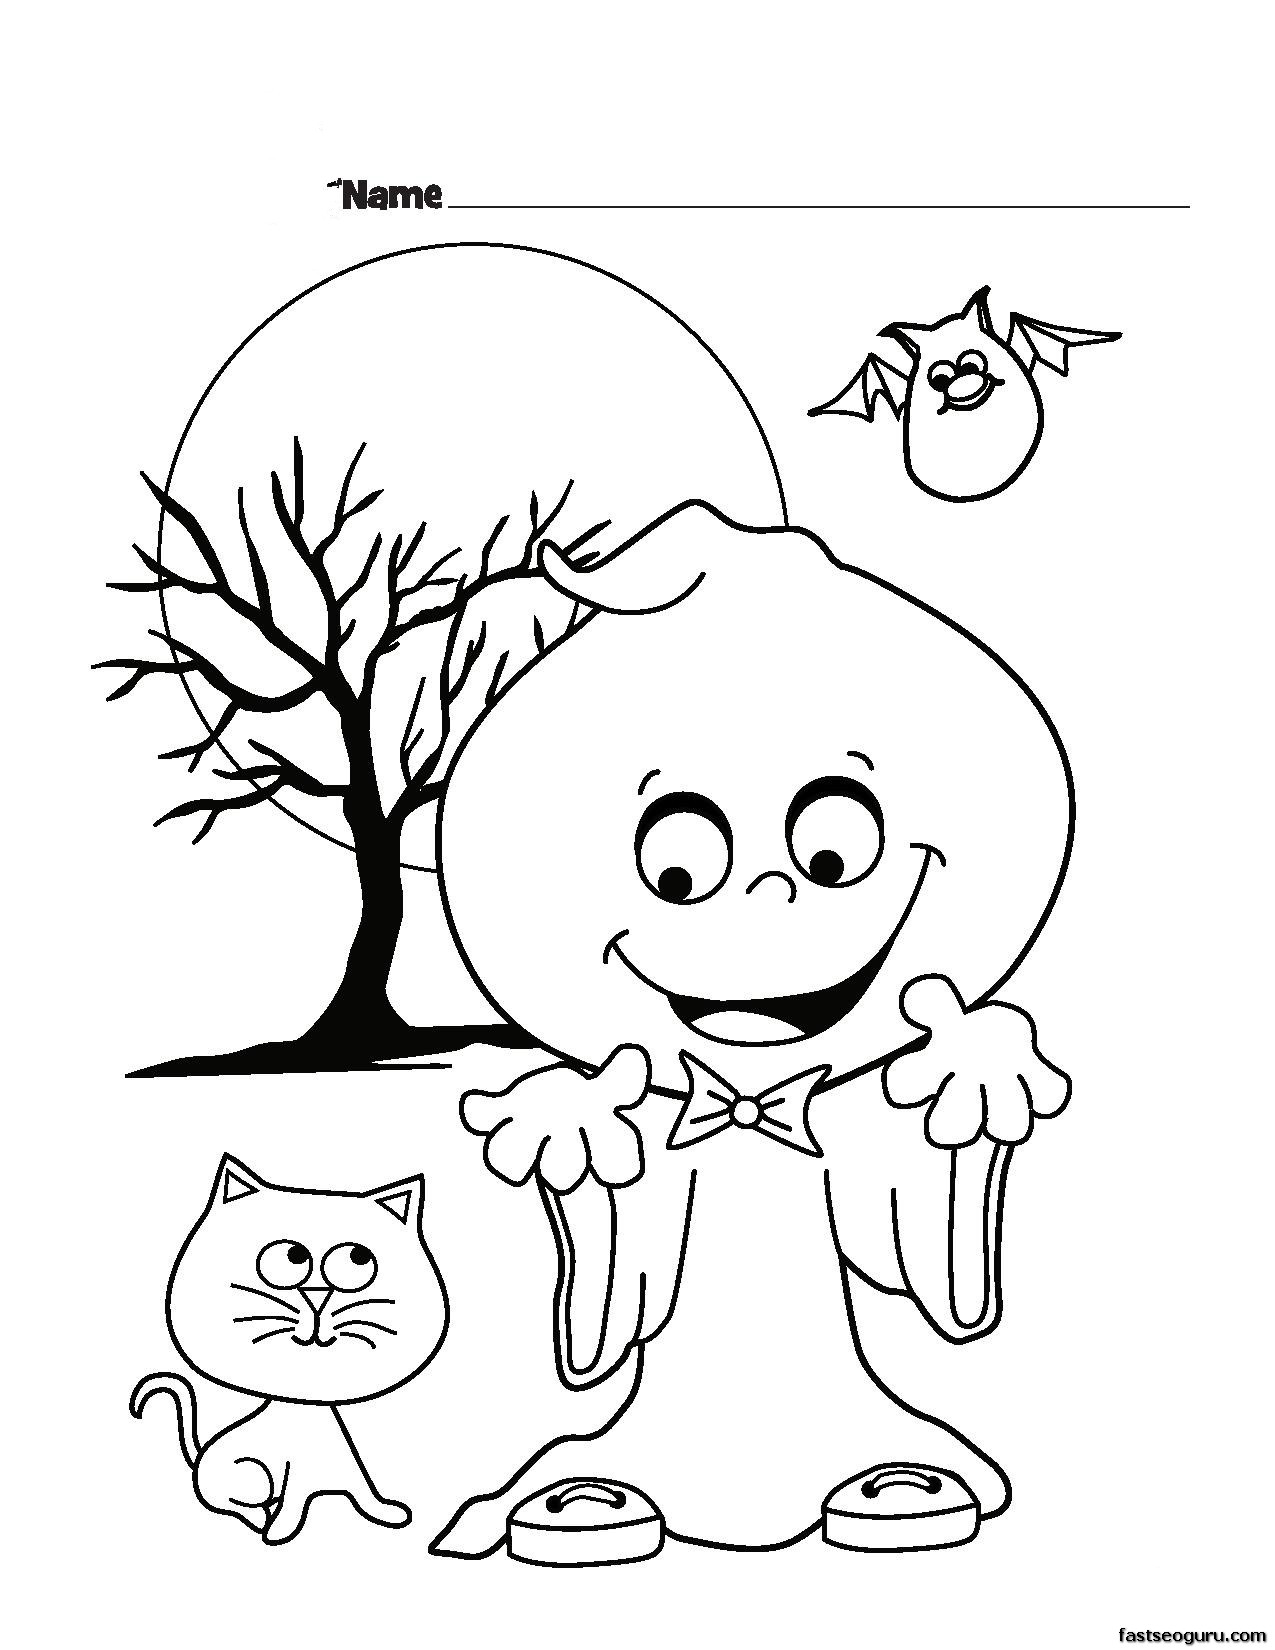 Halloween Silly Printable coloring pages for kids